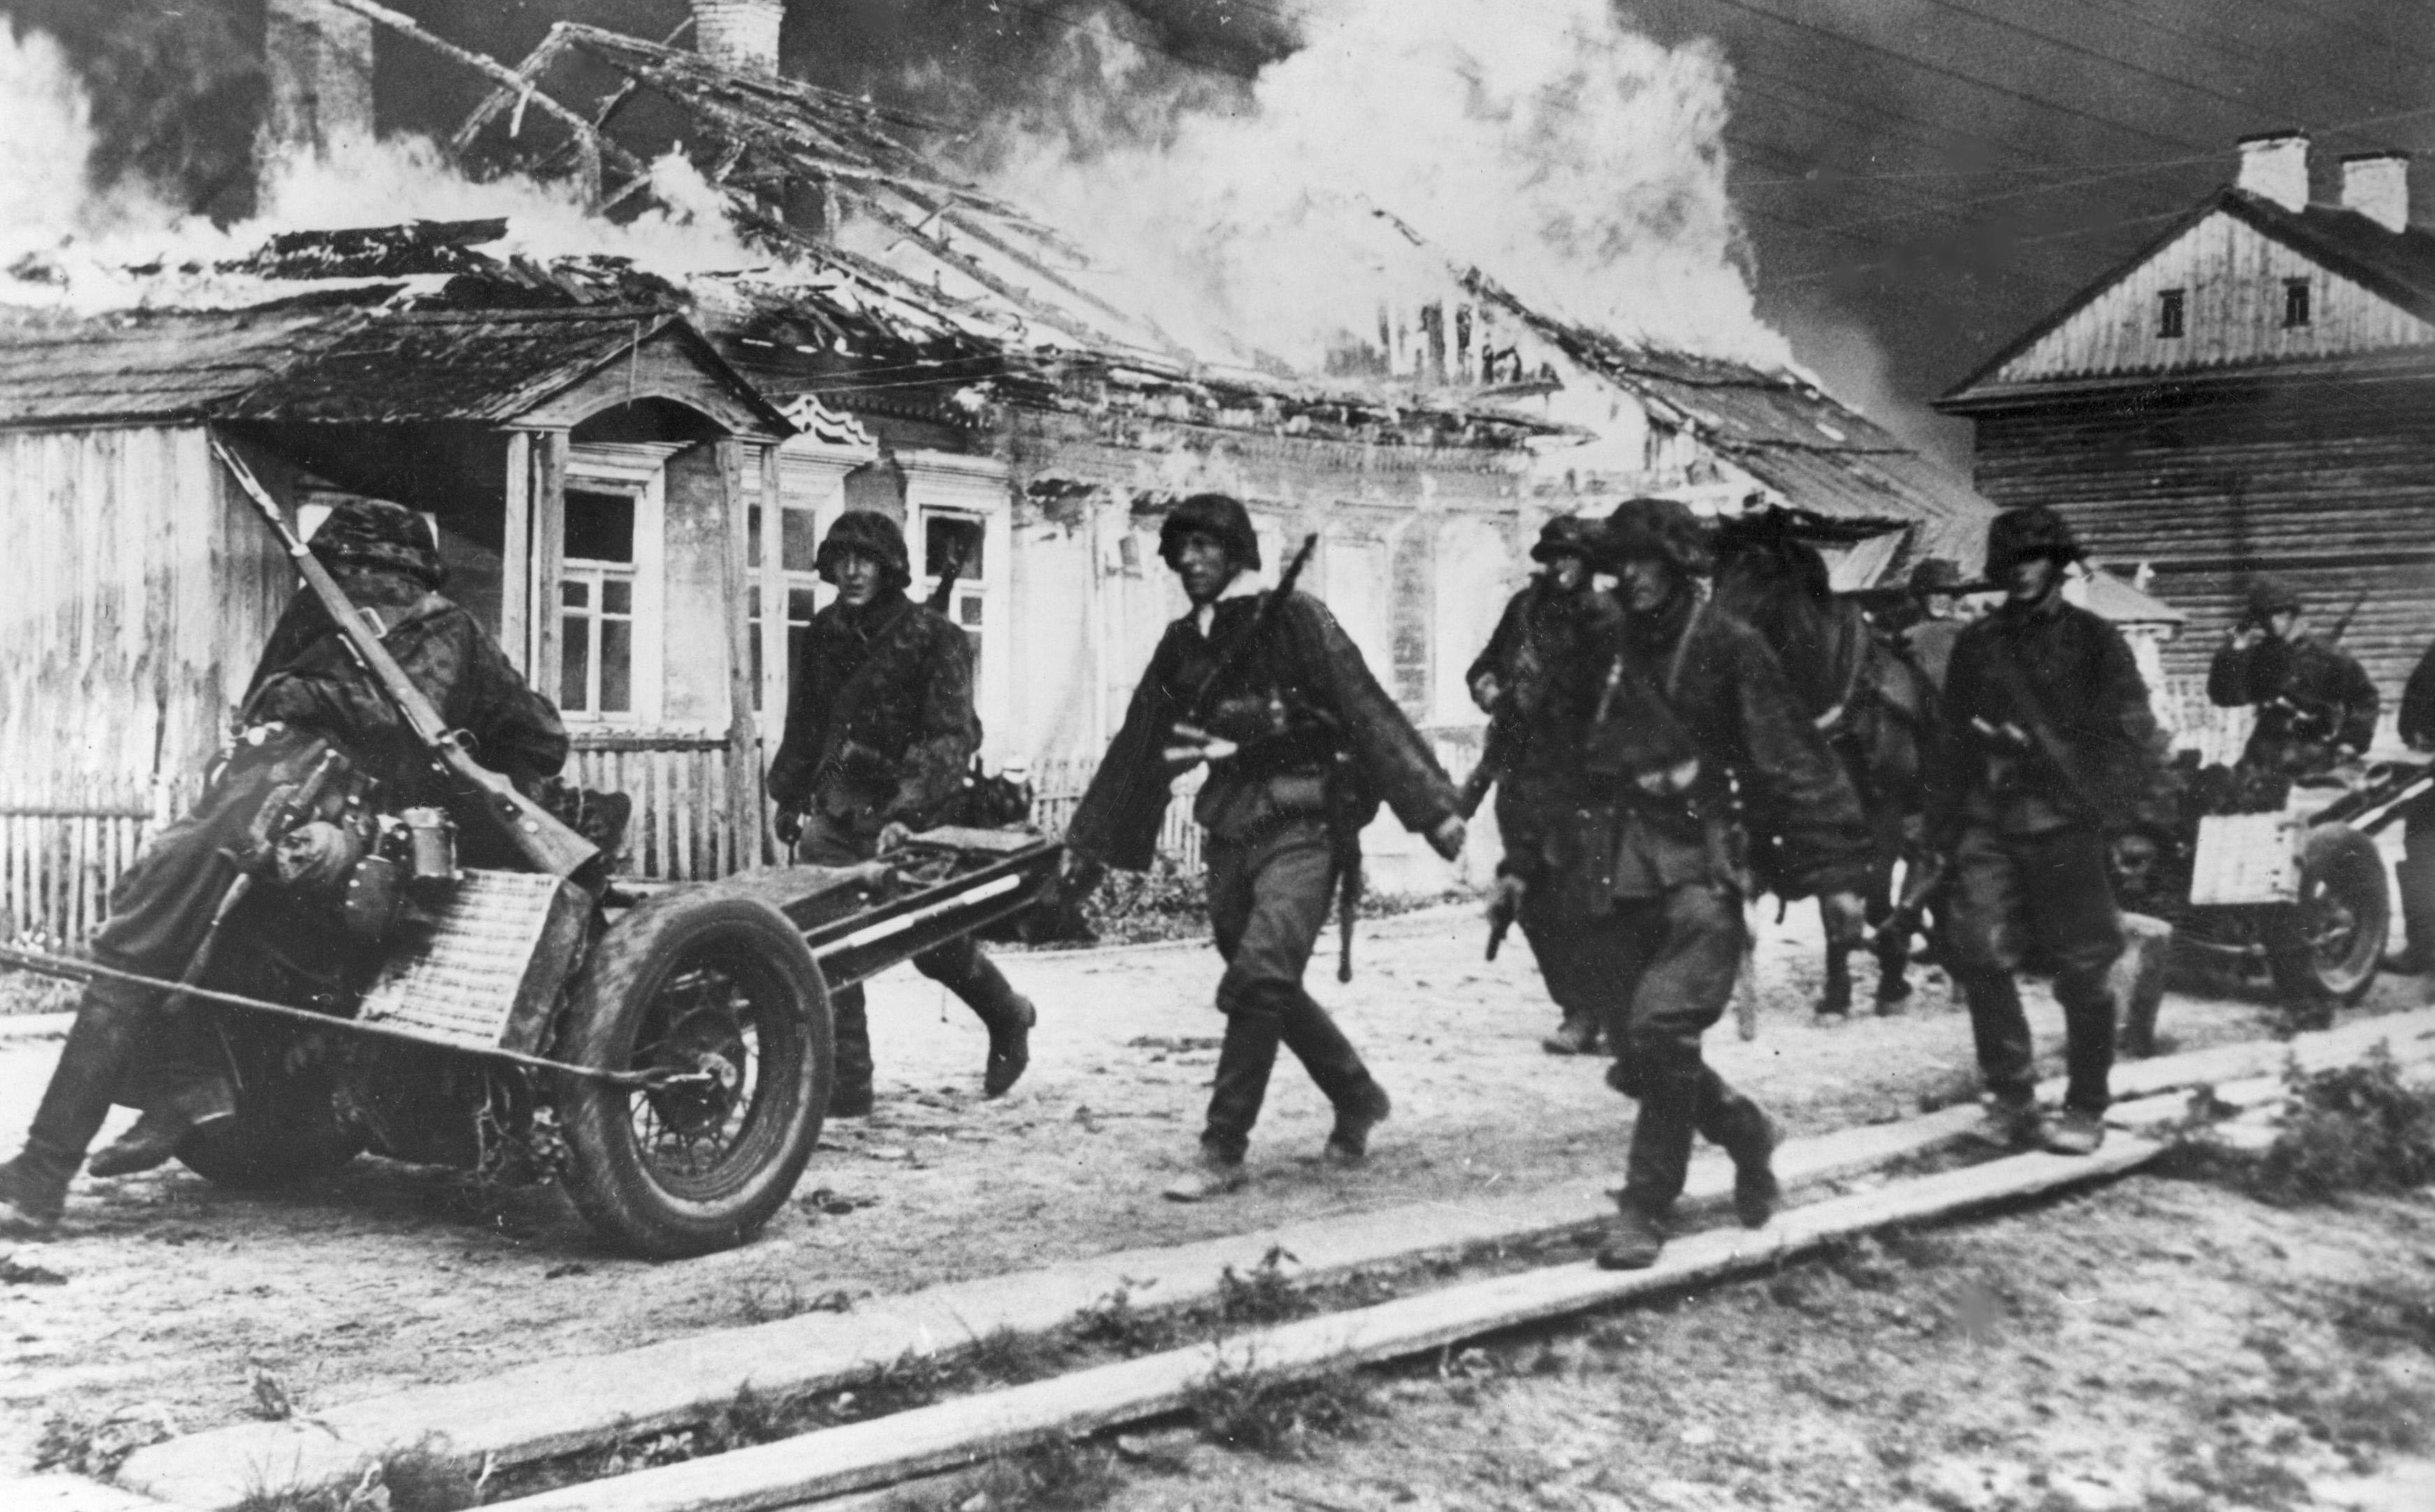 A Waffen-SS unit burns a village while advancing on the Eastern Front, c. 1941 / Polish State Archive